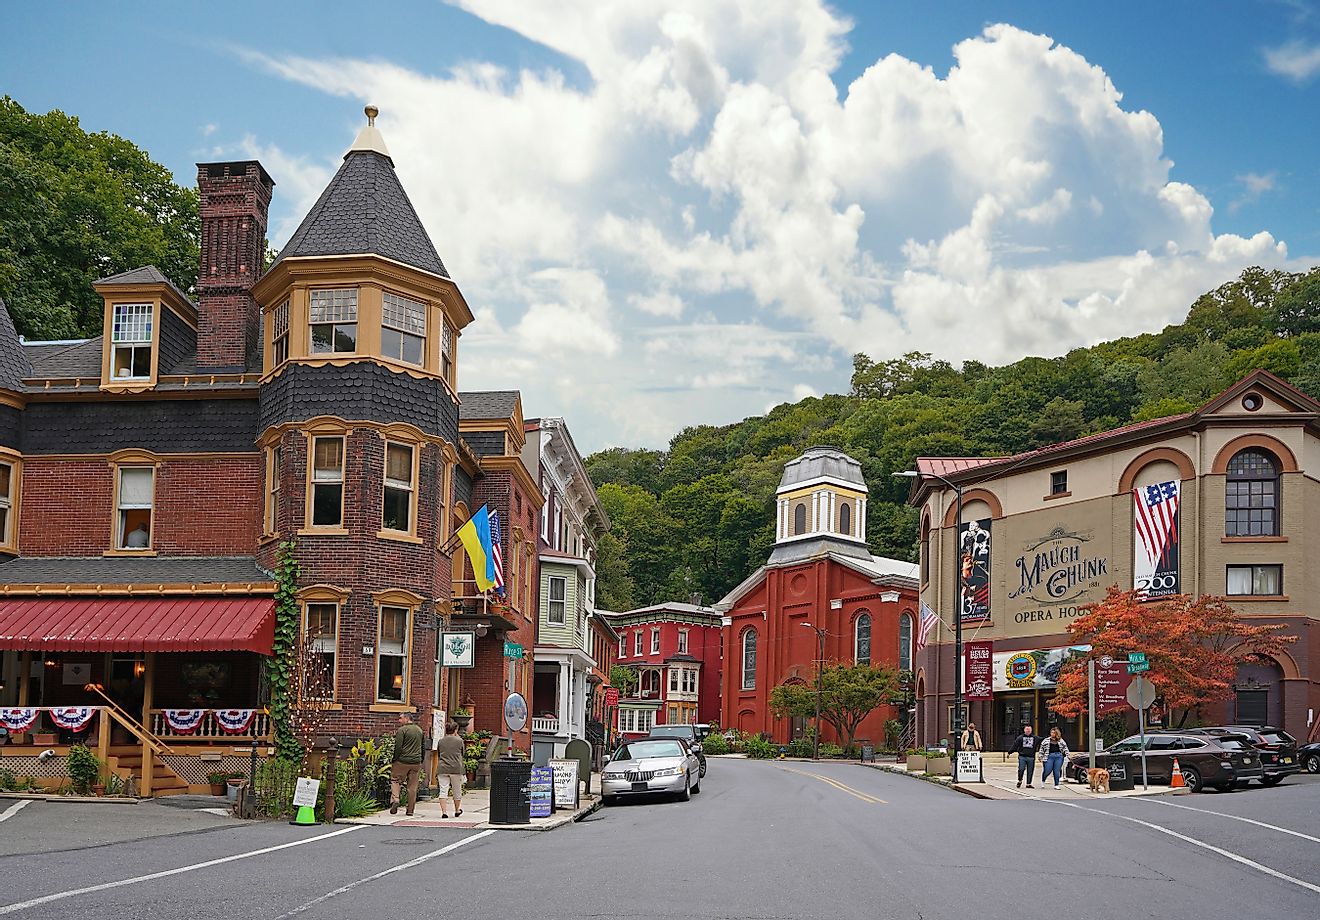 The Mauch Chunk Opera House in historic downtown Jim Thorpe, Pennsylvania.